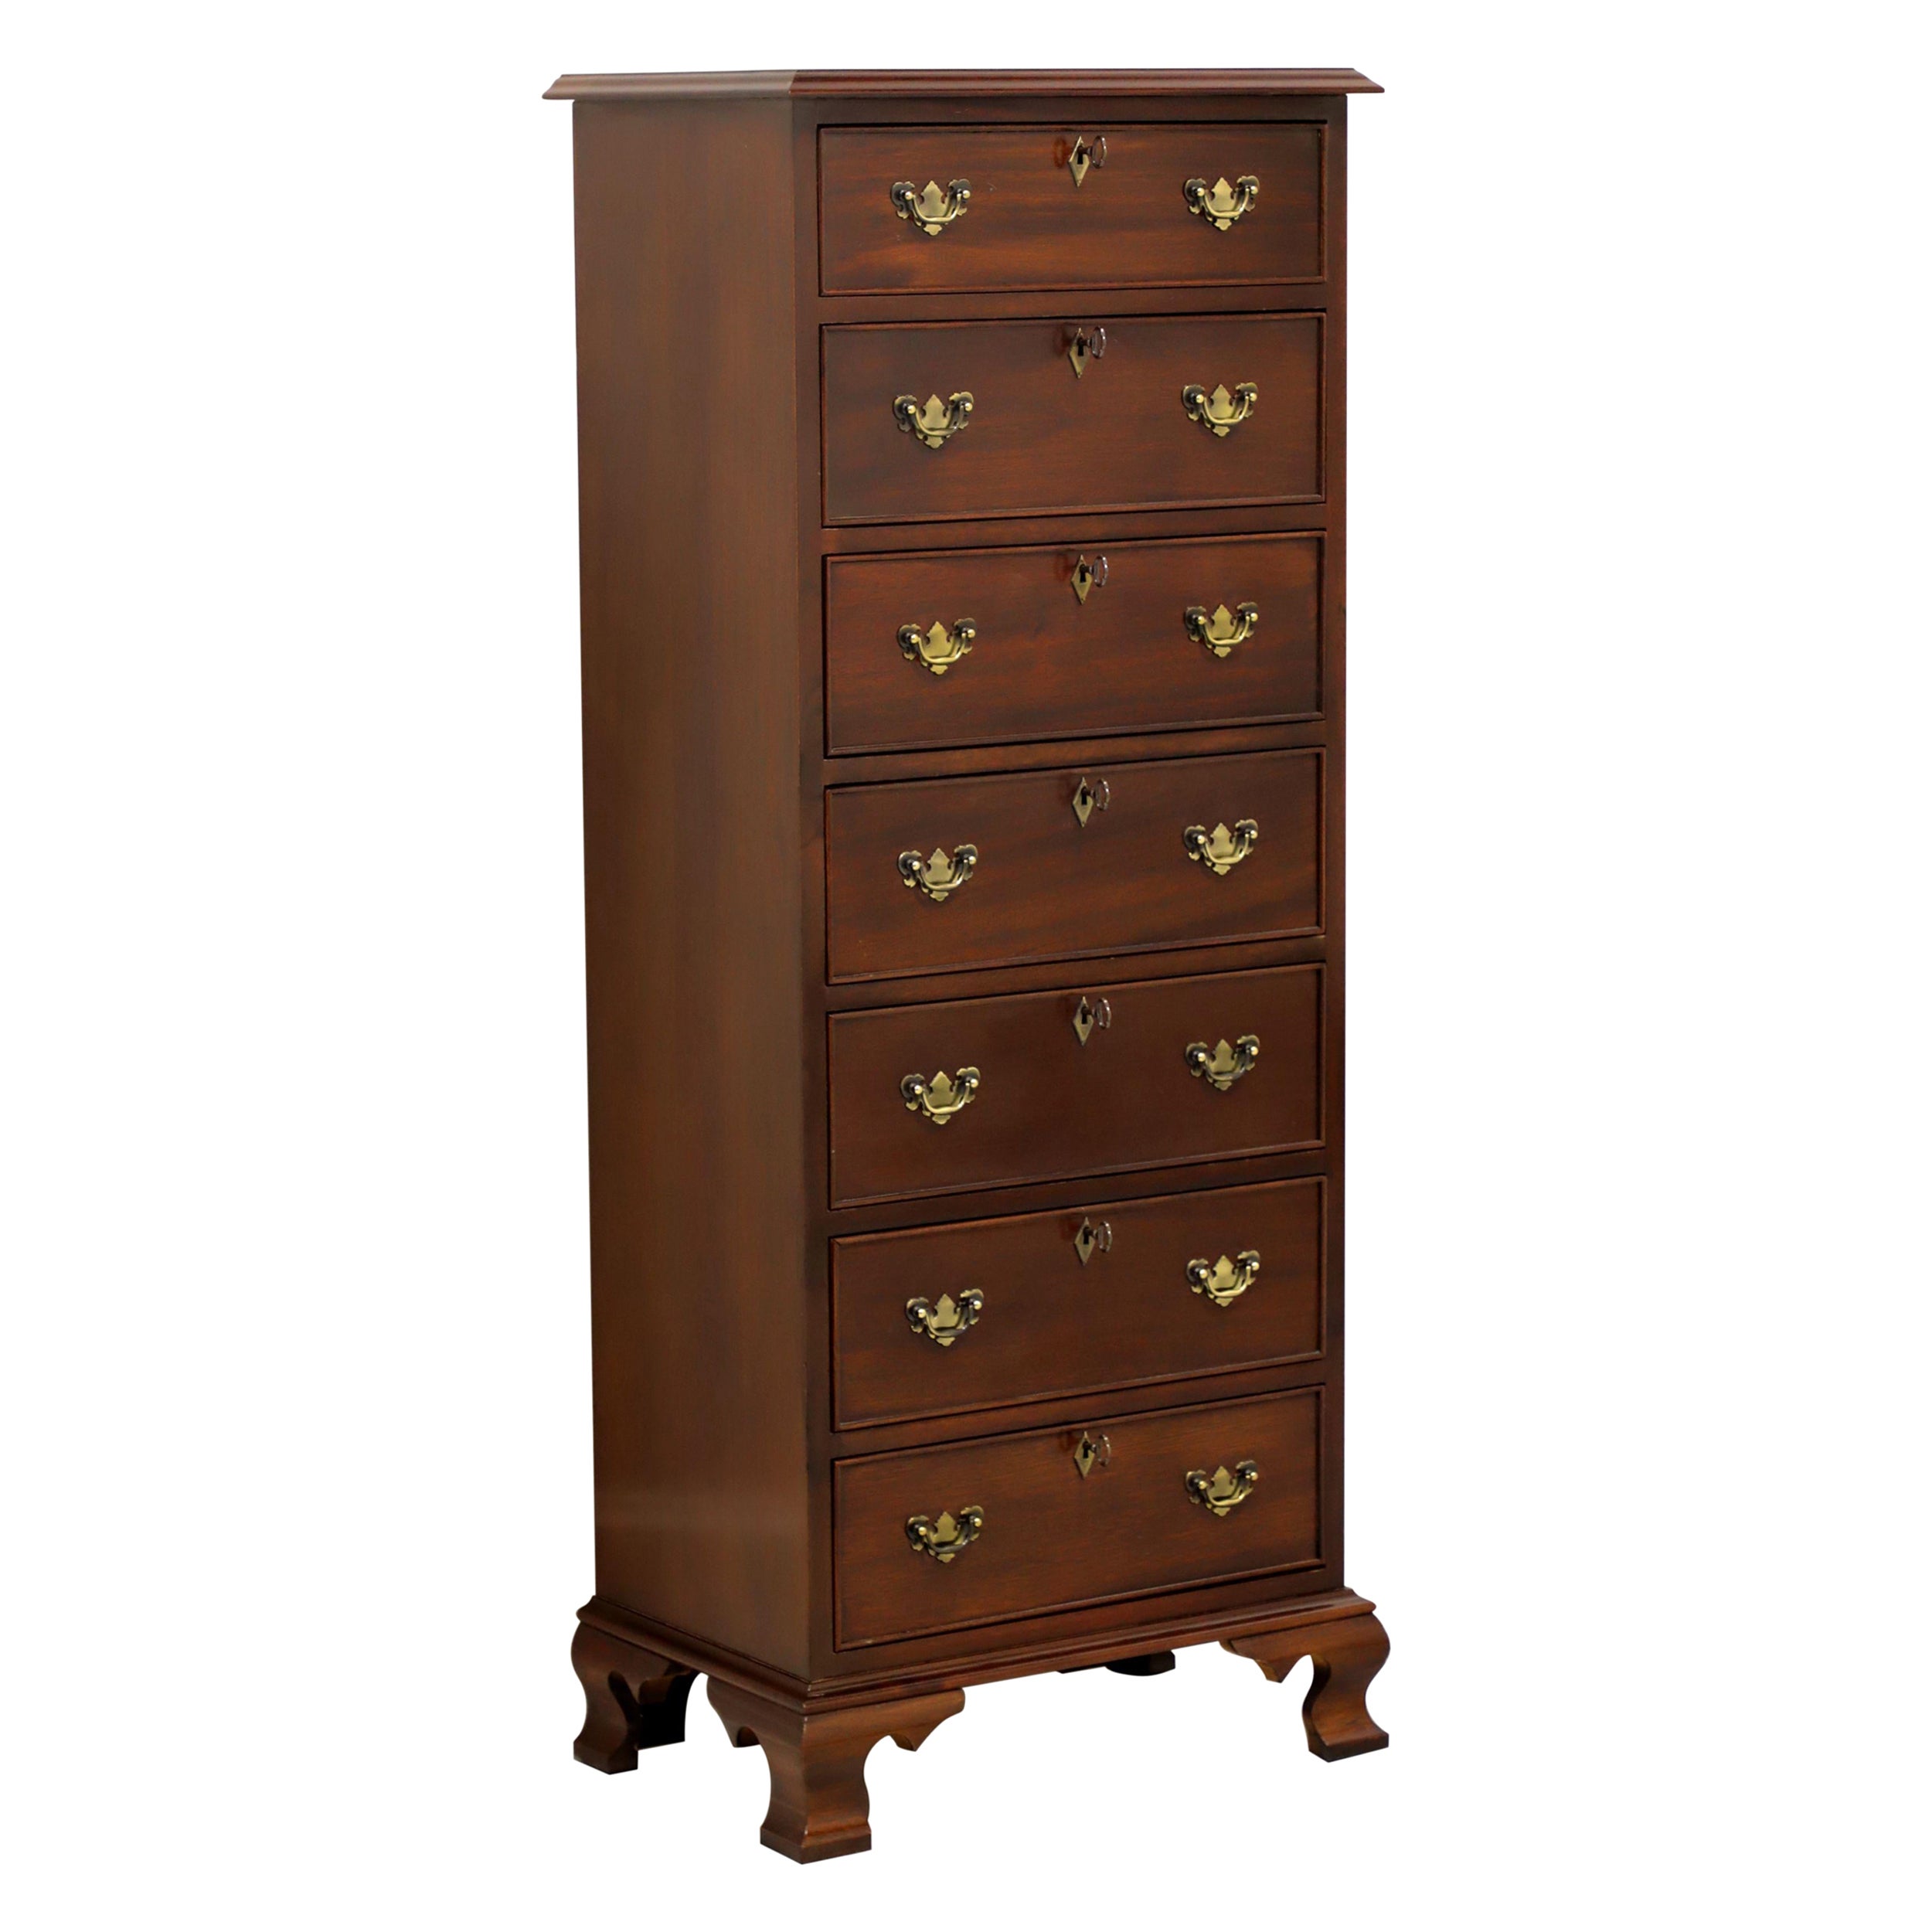 CRAFTIQUE Solid Mahogany Chippendale Style Semainier Lingerie Chest w/ Ogee Feet